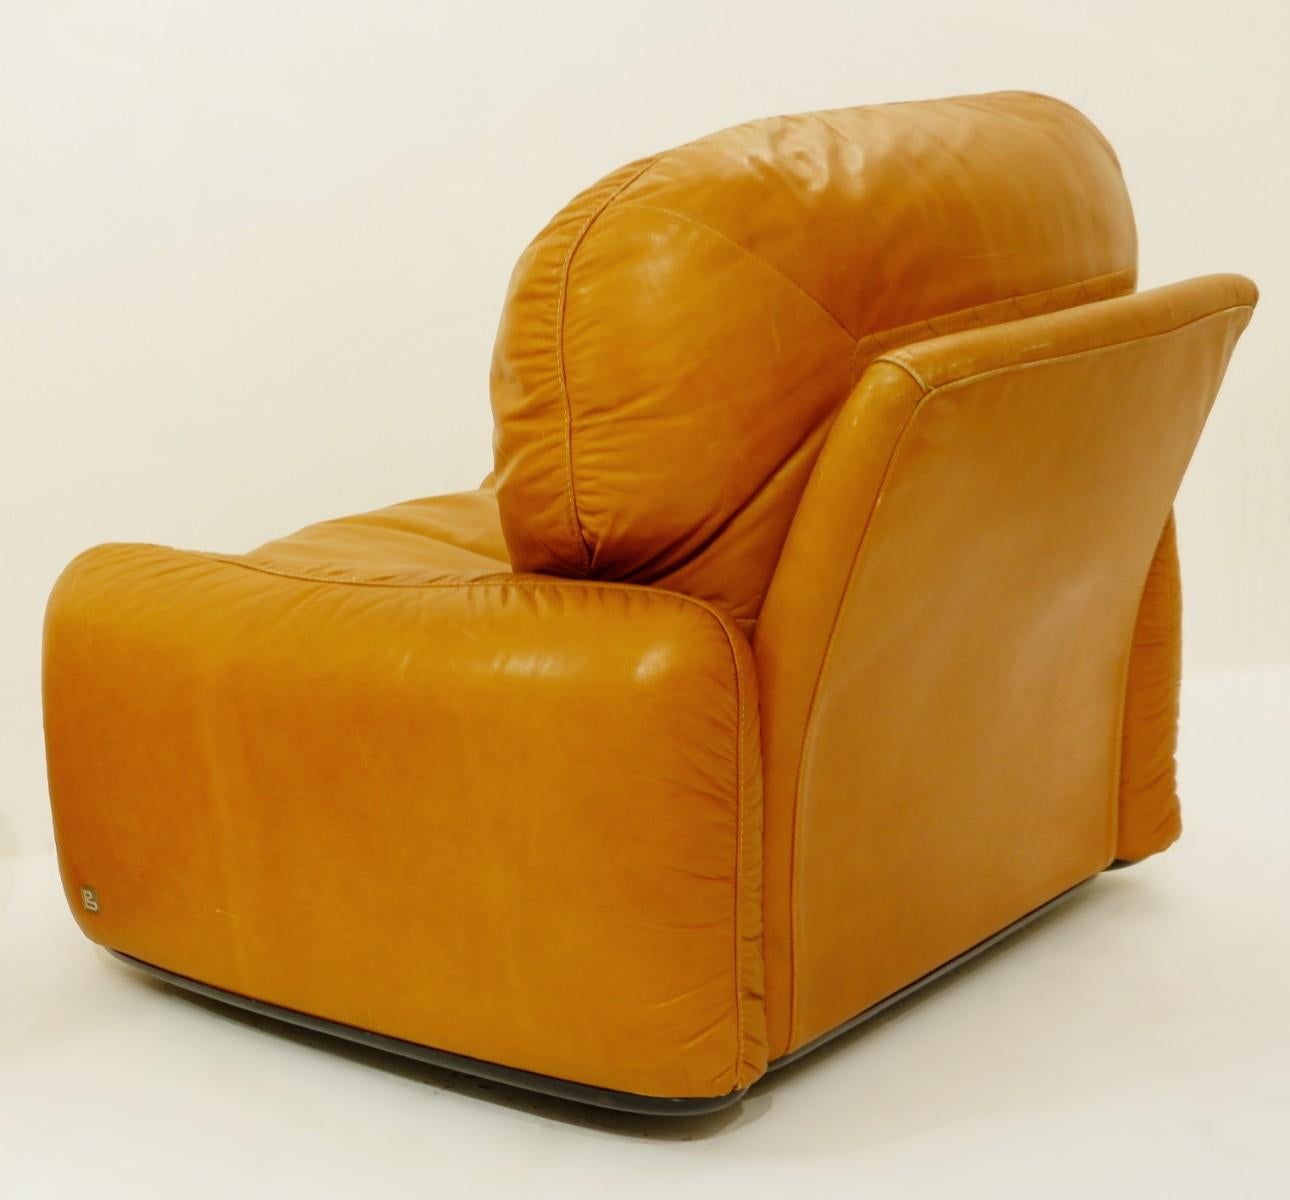 Late 20th Century Pair of Cognac Leather Lounge Chairs by Arrigo Arrigoni for Busnelli, 1970s